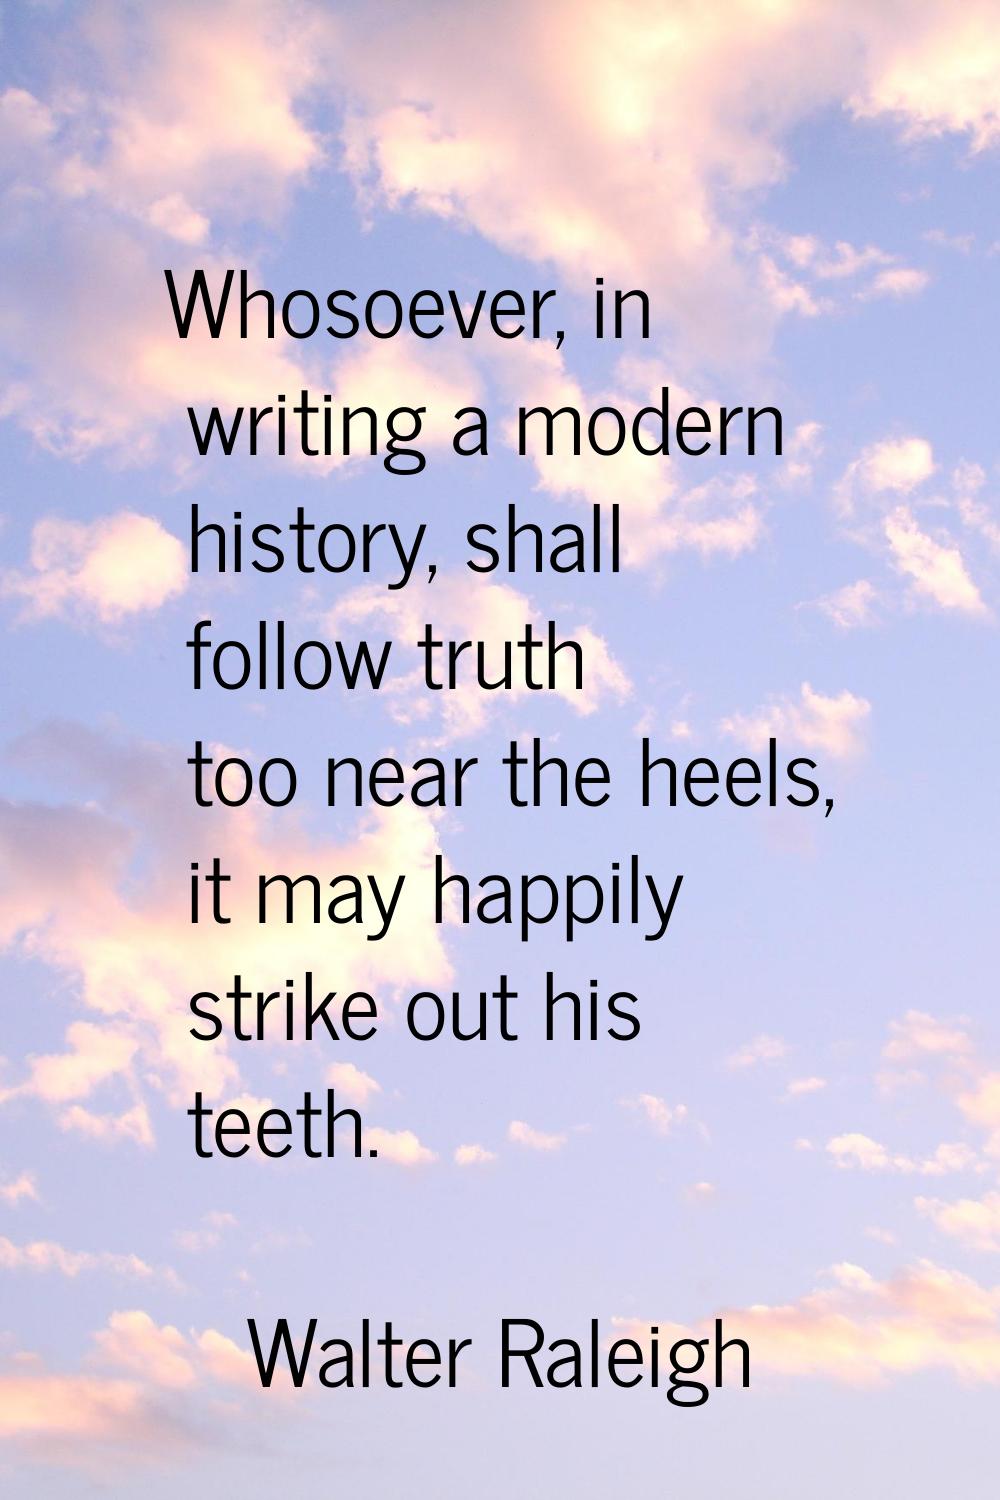 Whosoever, in writing a modern history, shall follow truth too near the heels, it may happily strik